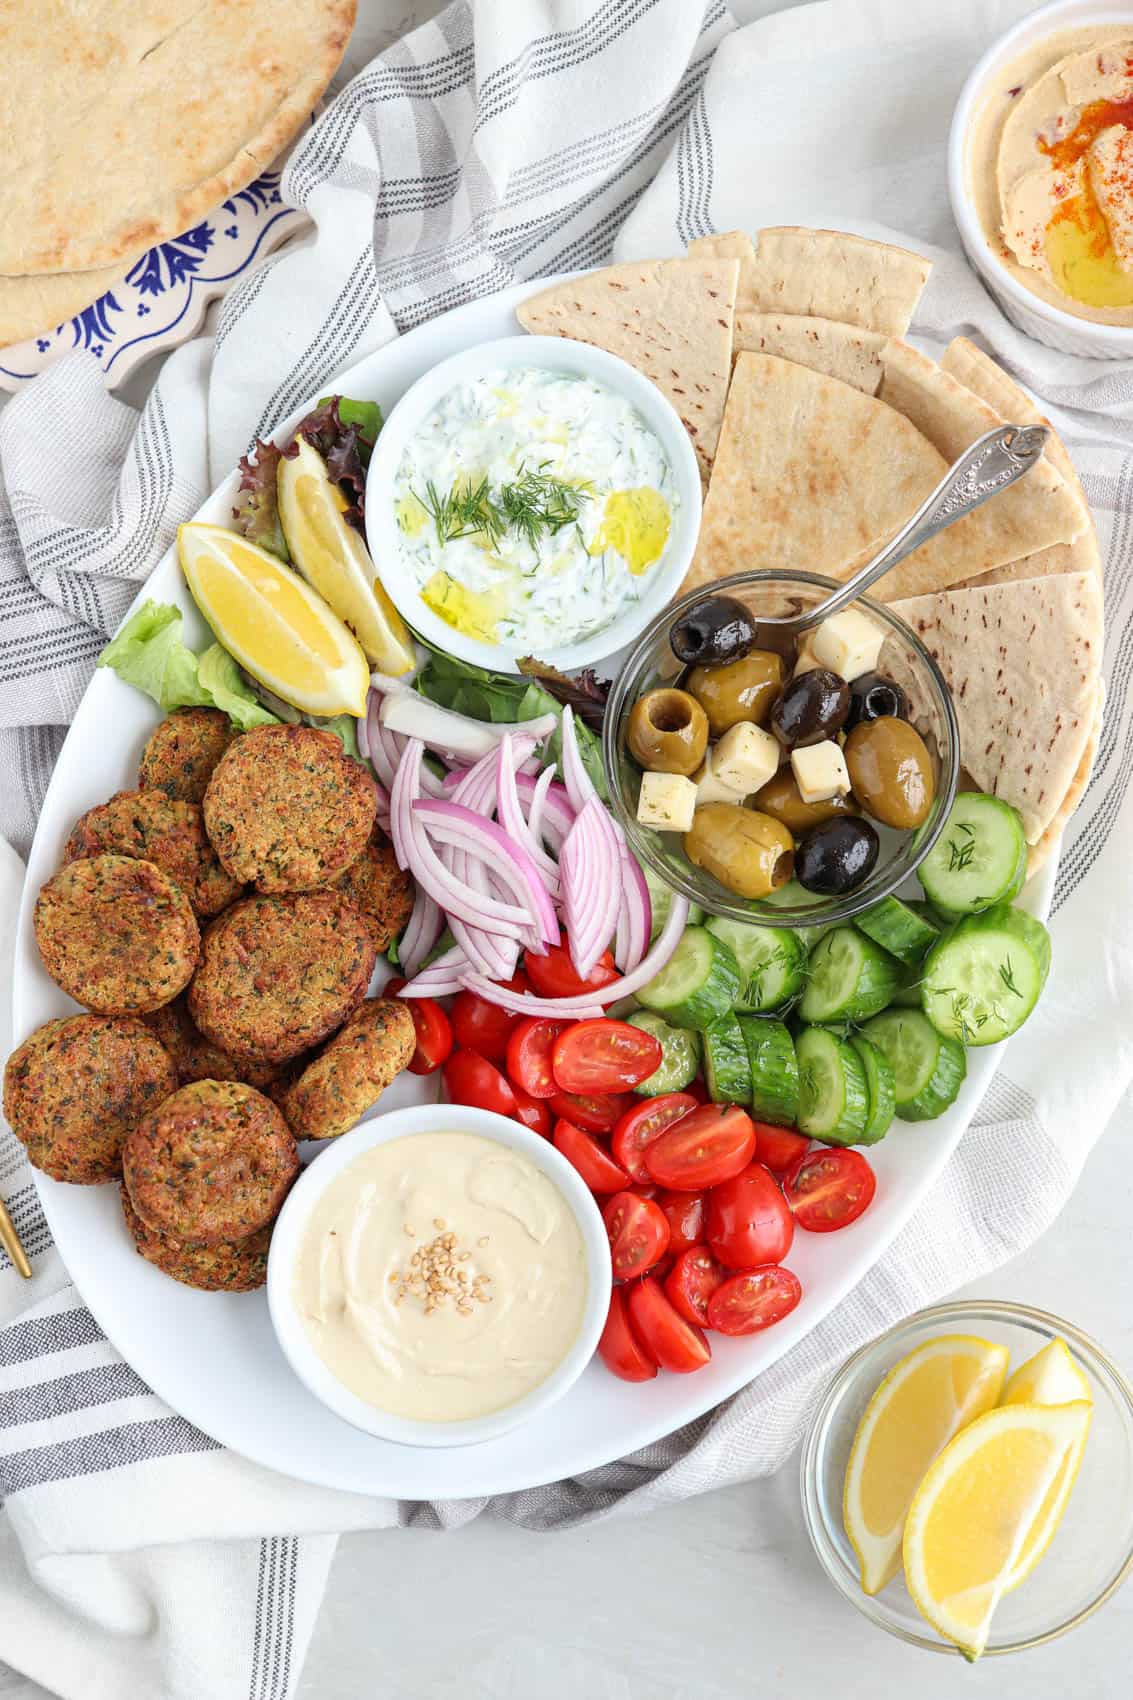 oval falafel platter with falafel patties, pita triangles, fresh veggies, two dips, greens and olives.